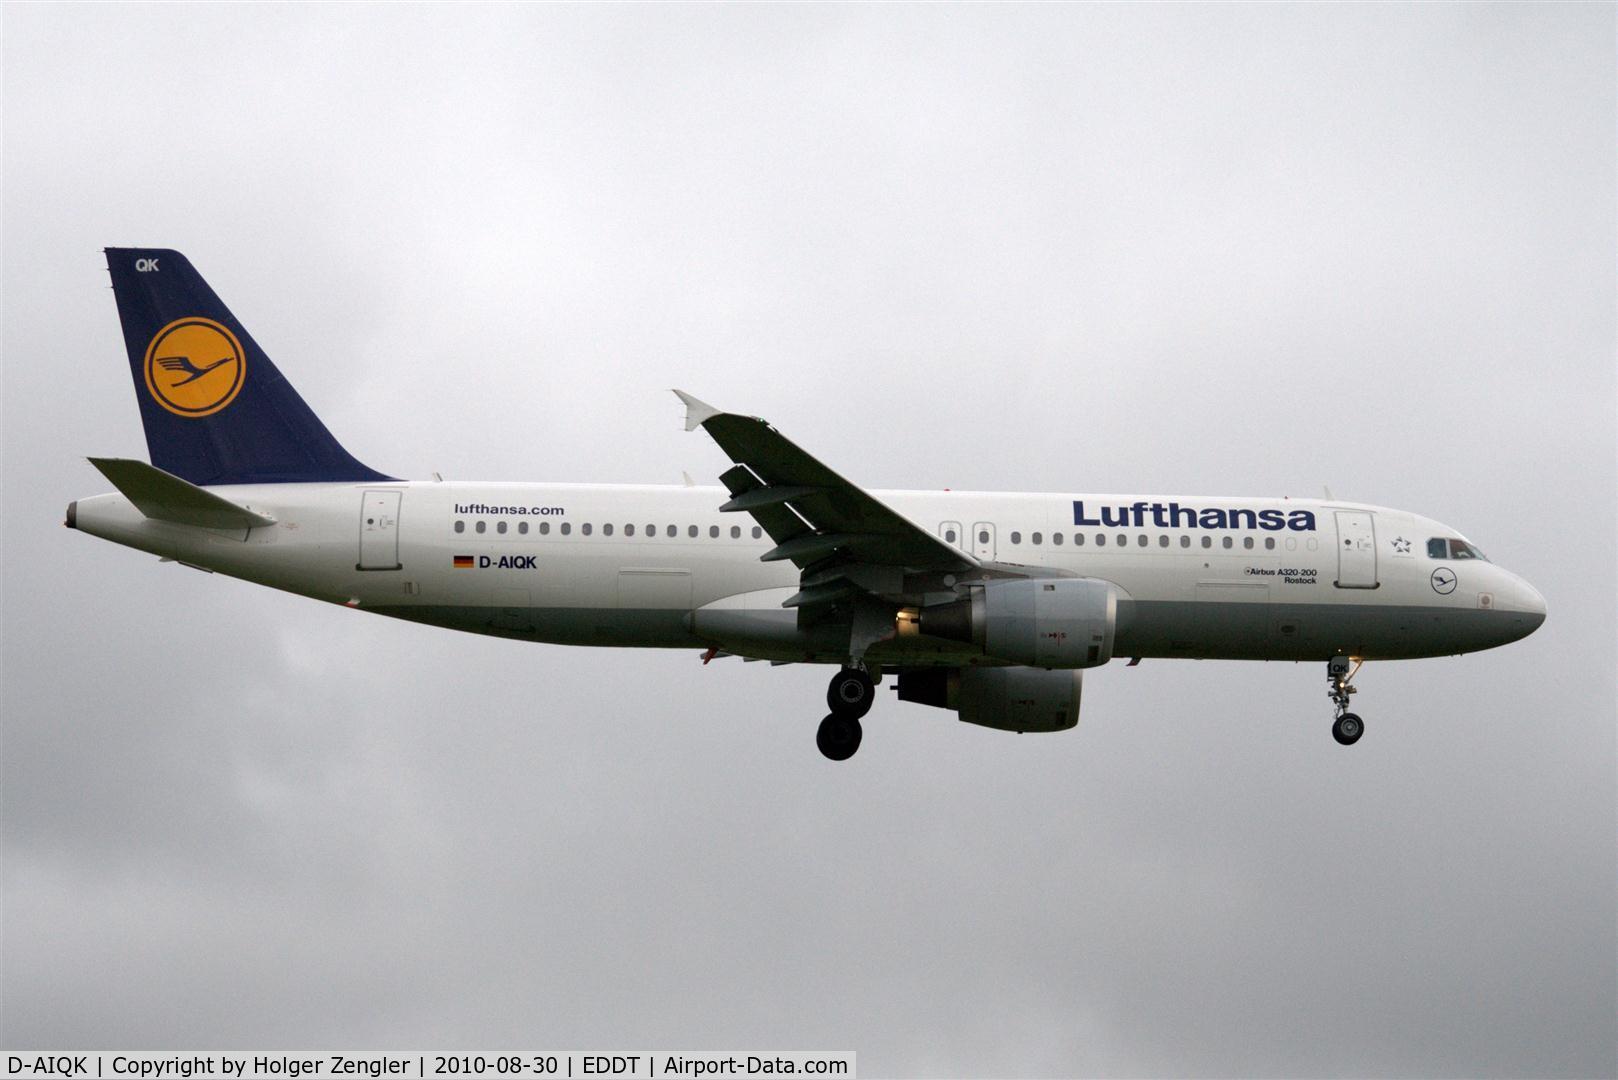 D-AIQK, 1991 Airbus A320-211 C/N 0218, LH 216 from Munich is coming down on runway 26R